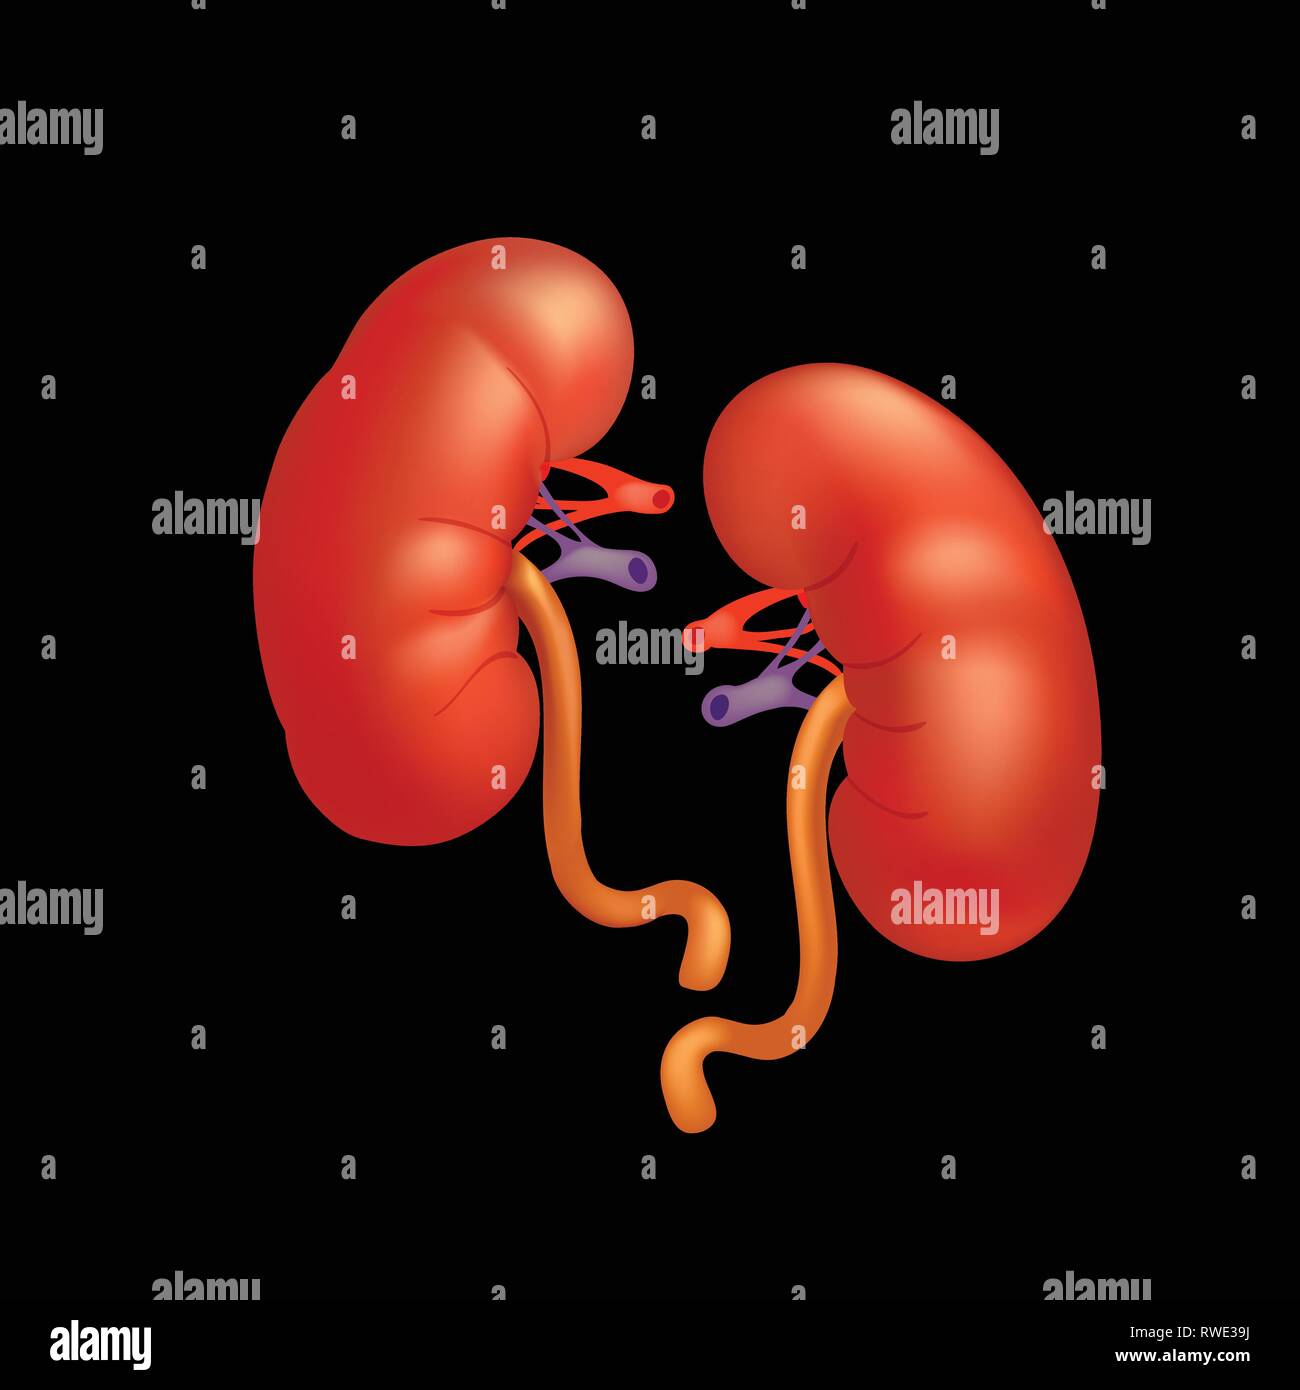 Realistic human kidneys isolated on black background. Stock Vector